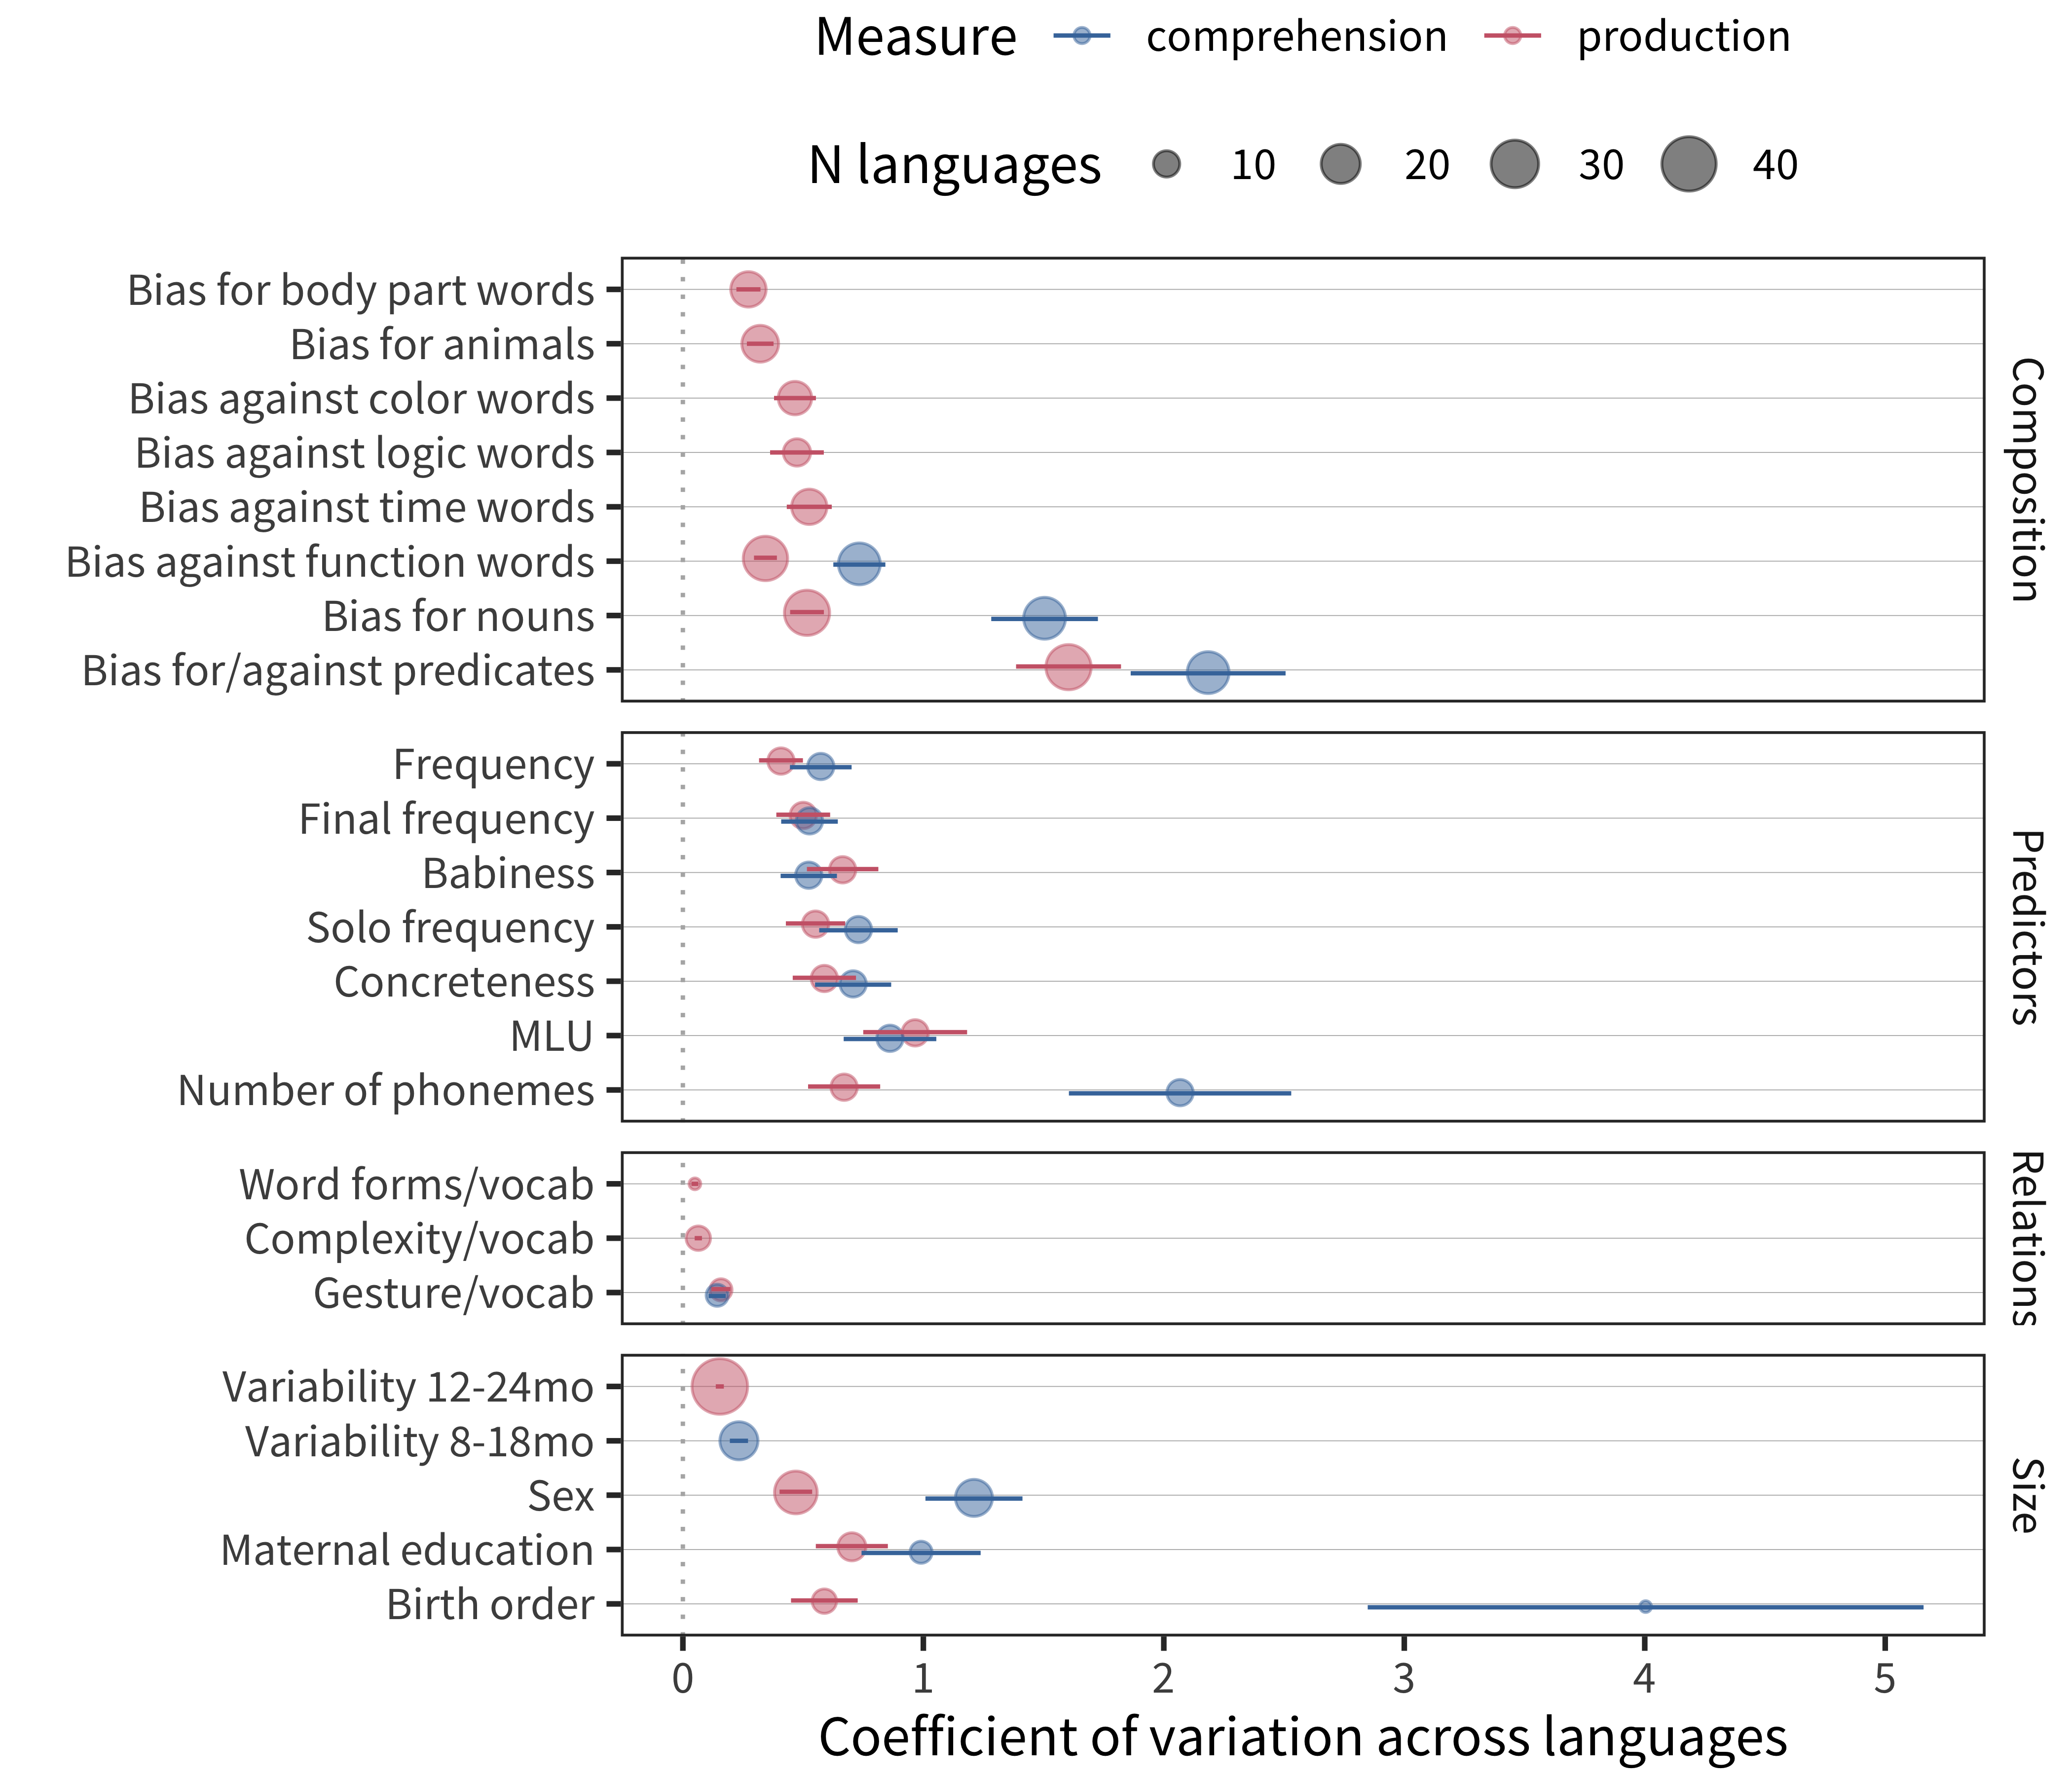 Coefficient of variation across languages for signatures of language development corresponding to four different categories (panels). Each point gives an estimate, with point size corresponding to number of languages. Color indicates whether comprehension or production is measured. Error bars give the standard error of the coefficient of variation.